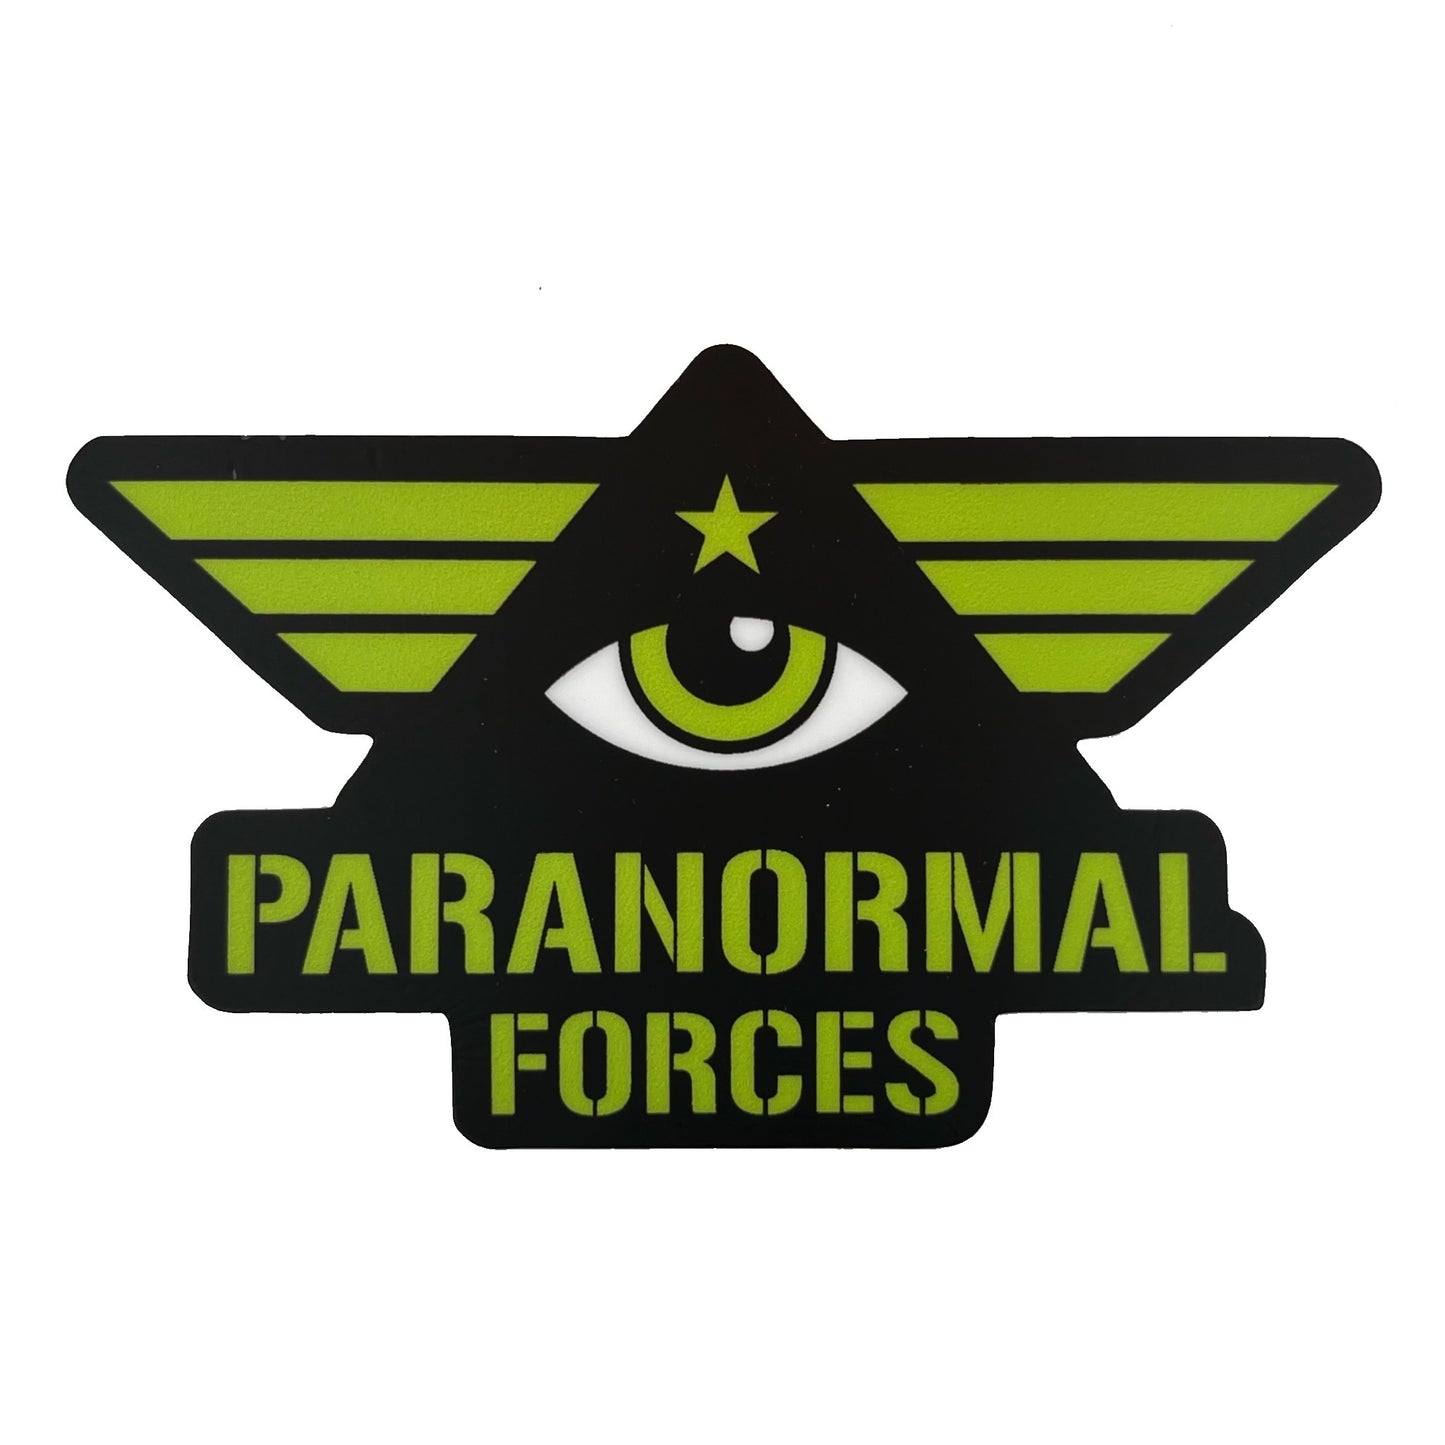 Paranormal Forces sticker